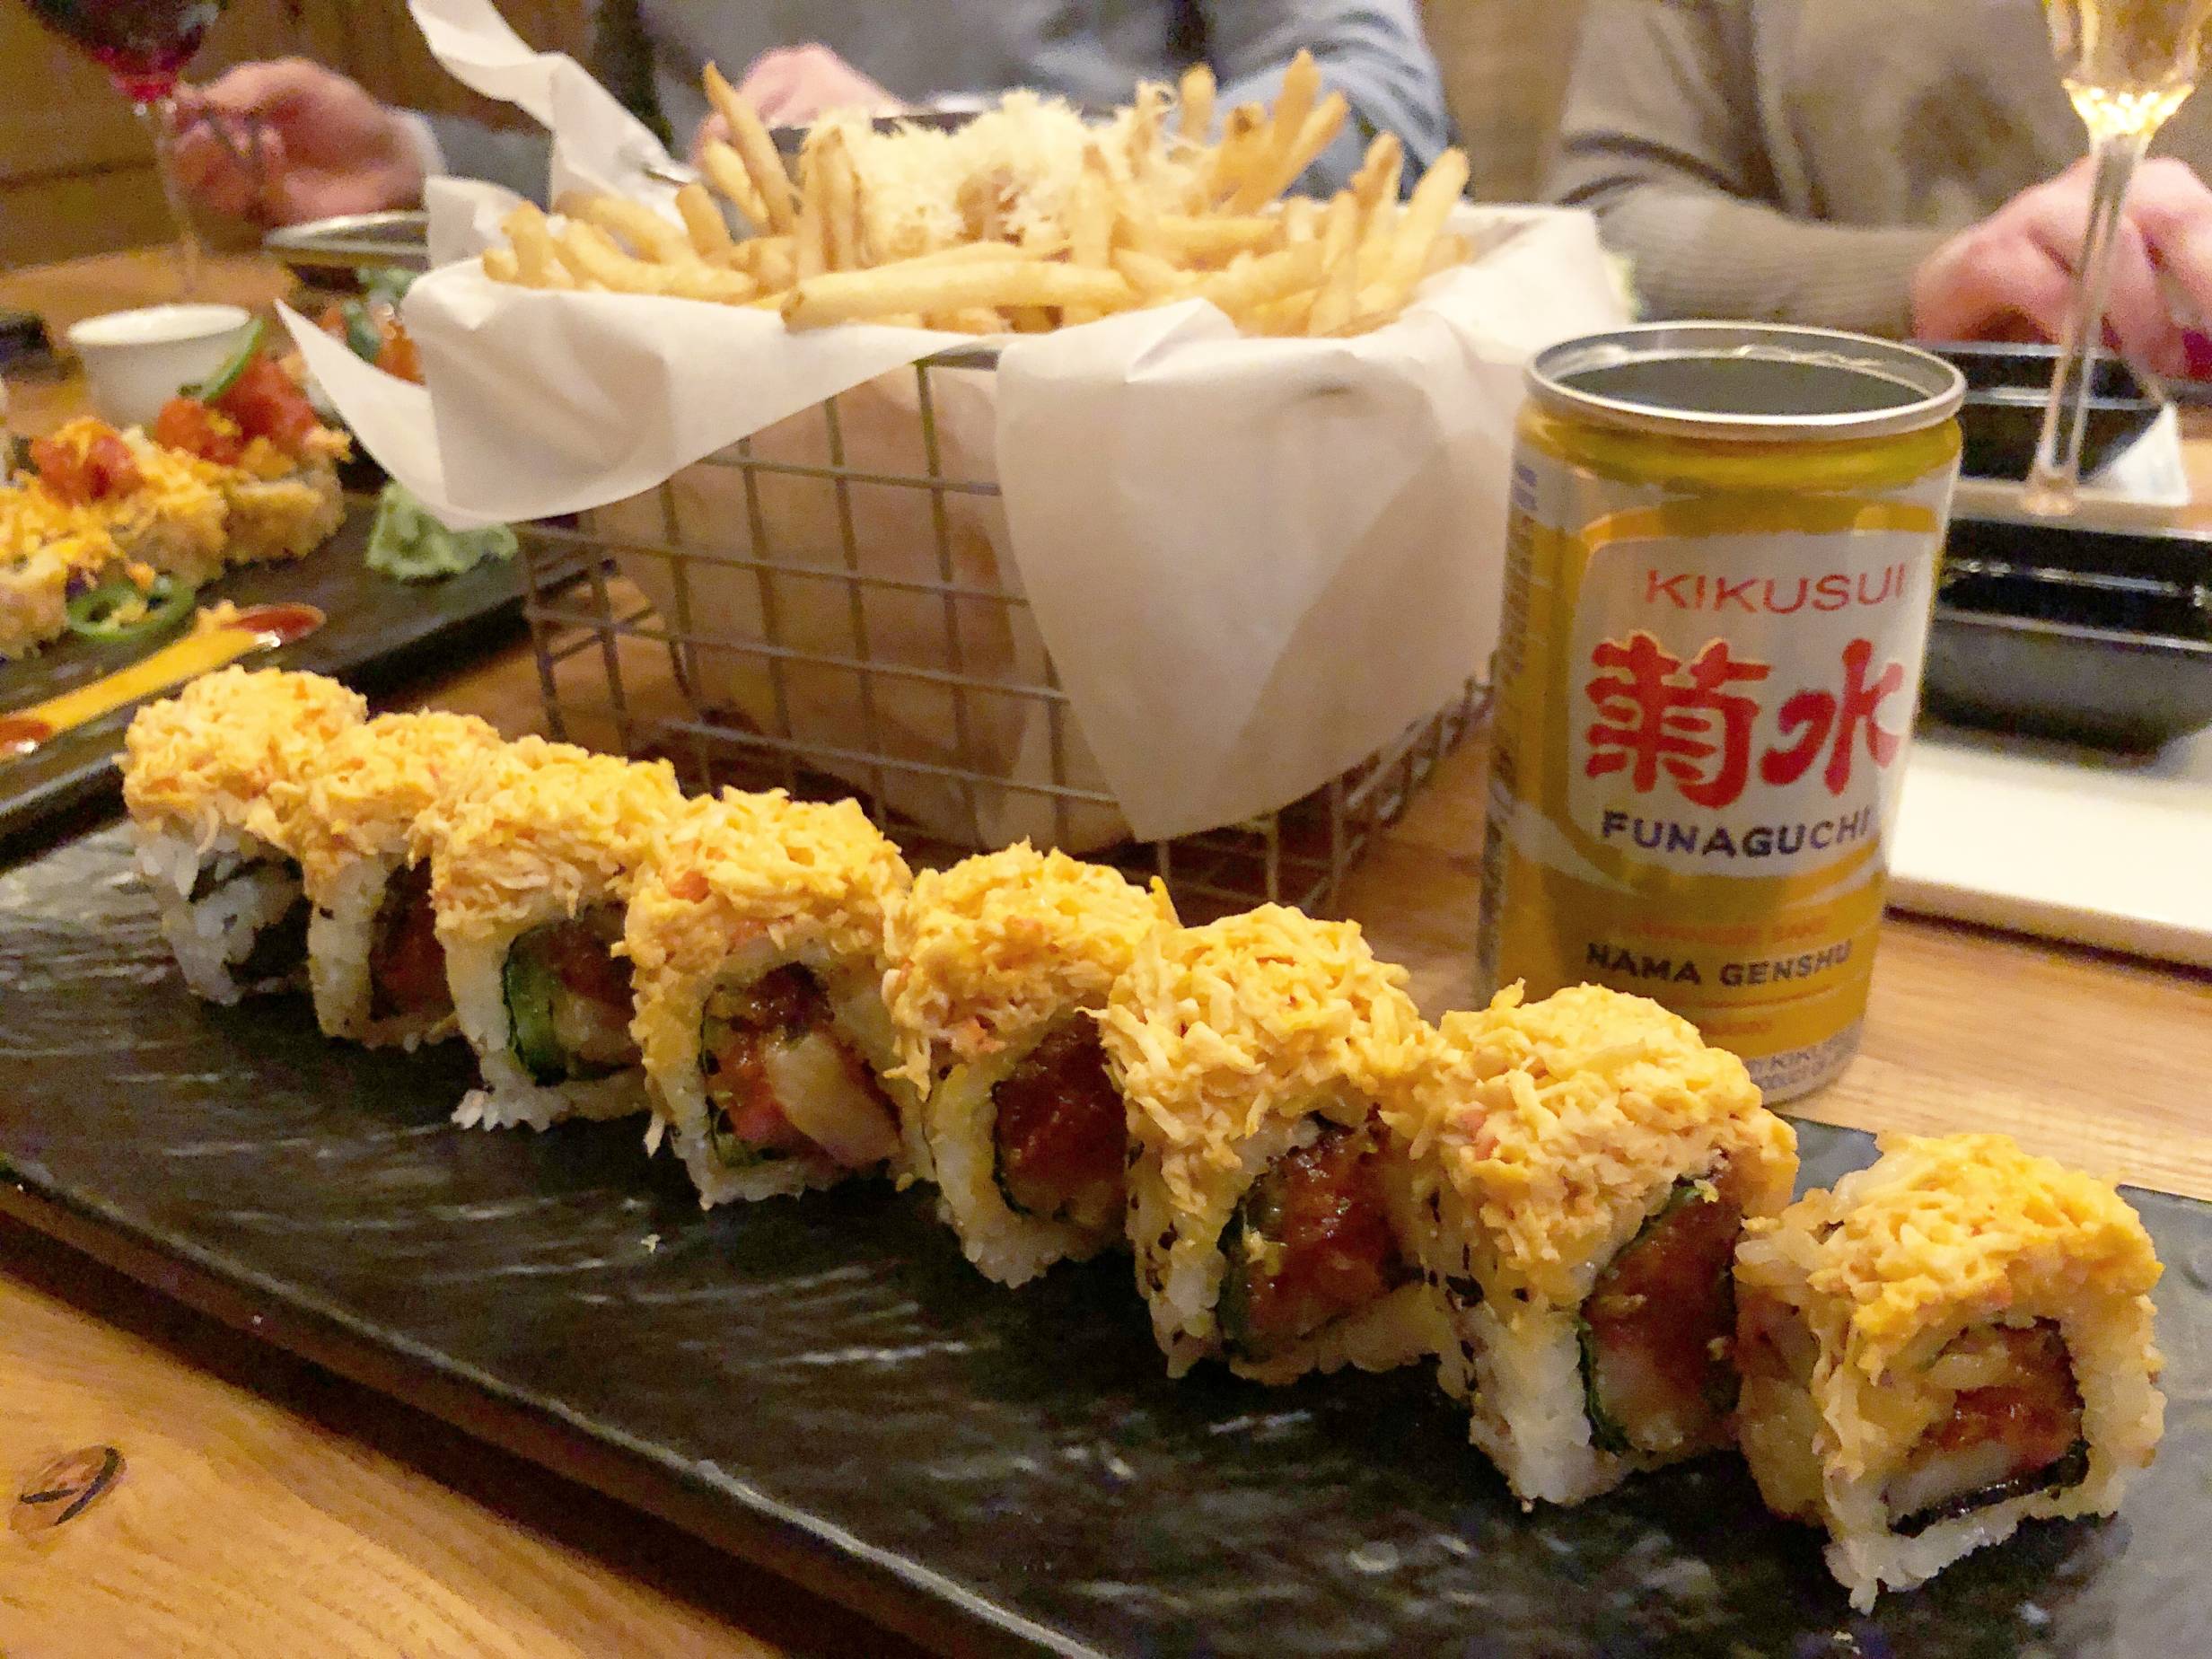 A tuna and yellowtail sushi roll topped with spicy crab sits on a black, rectangular plate. Behind it, there is a metal basket lined with parchment paper and fries topped with Parmesan sticking out of the basket. Beside the fries is a small, gold can of Funaguchi sake on a wooden tabletop. In the background of the image are other diners at Miga. Photo by Alyssa Buckley.